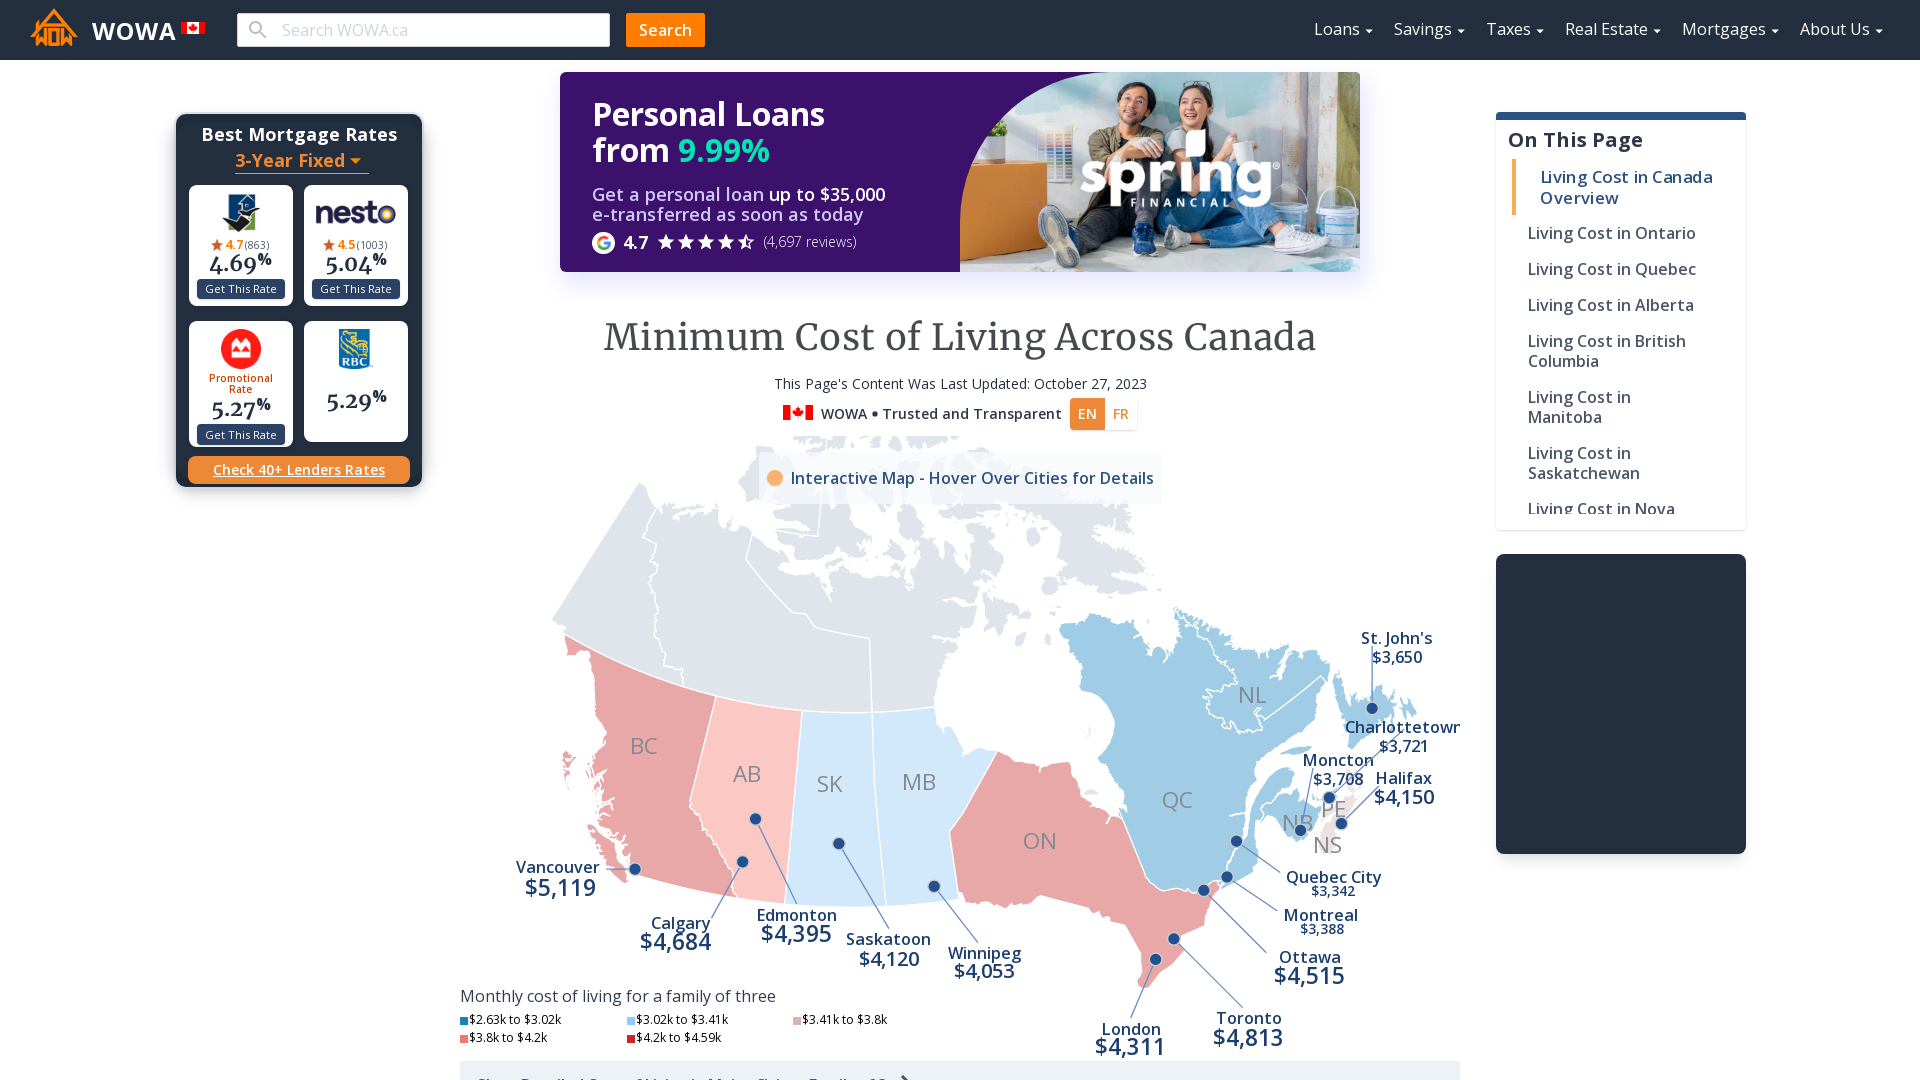 Which city in Canada has the highest cost of living?